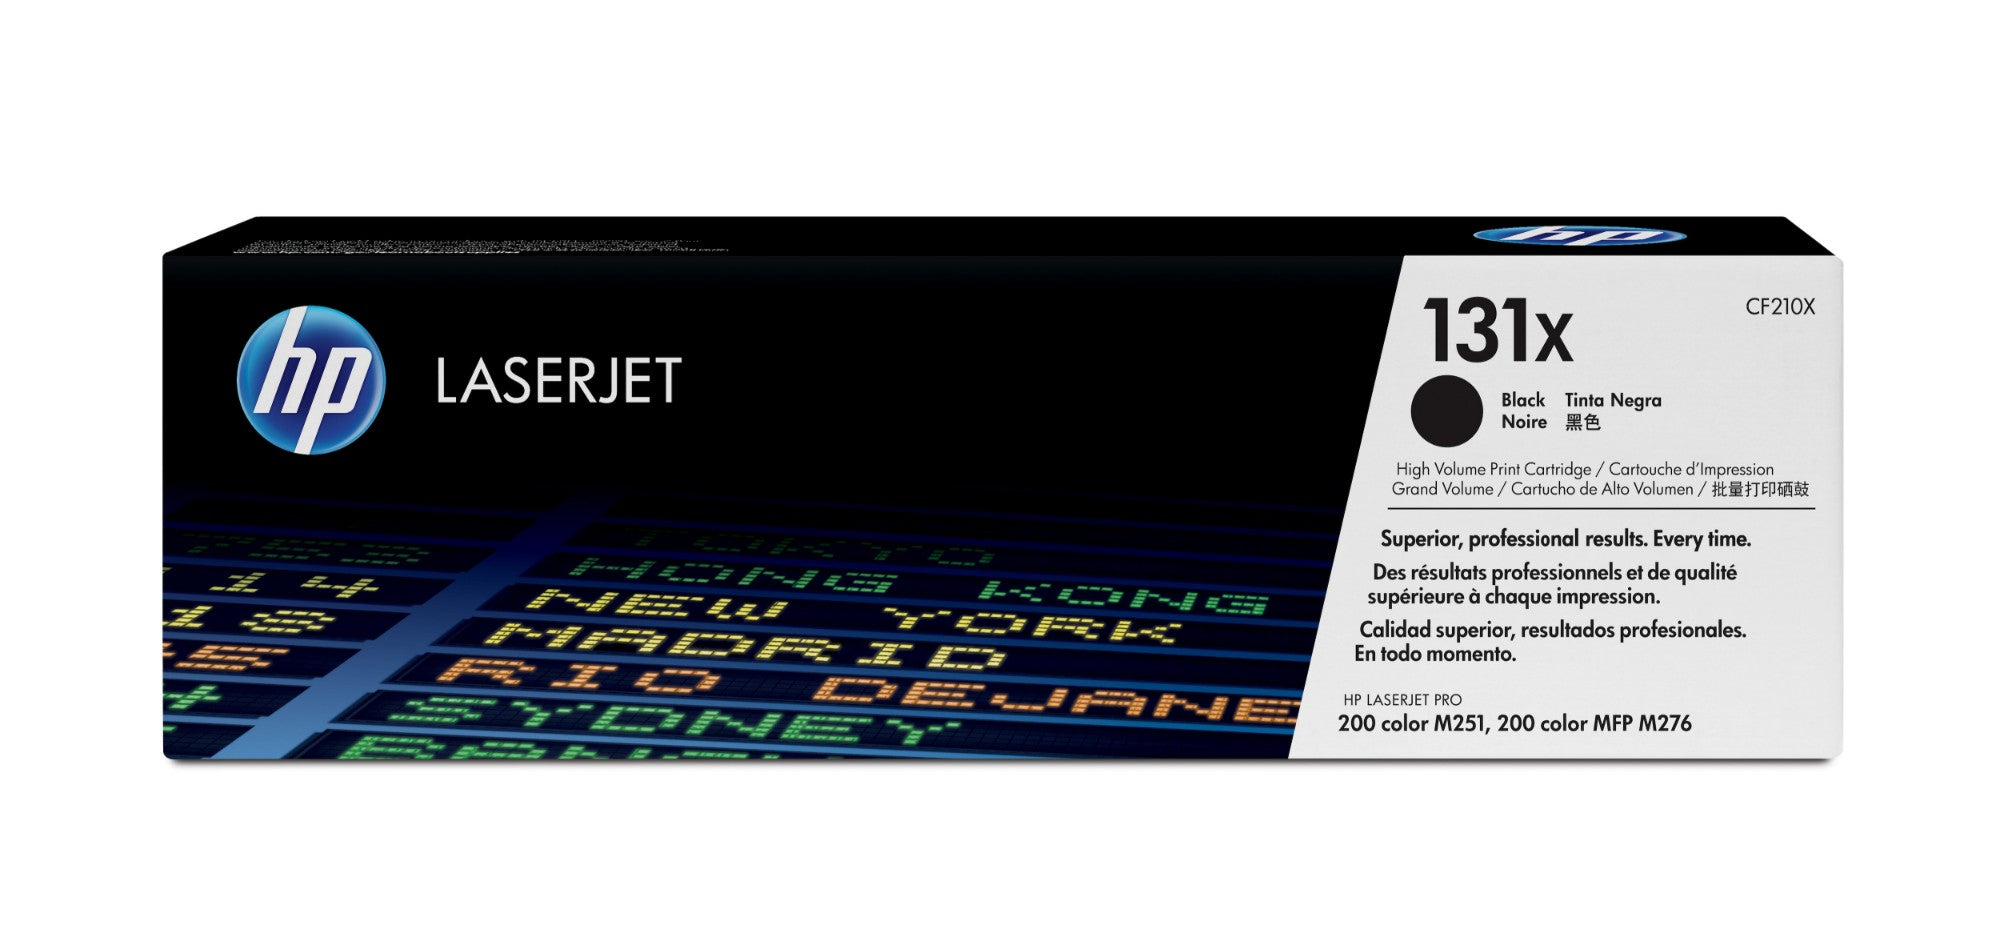 HP CF210X/131X Toner cartridge black, 2.4K pages ISO/IEC 19798 for HP Pro 200